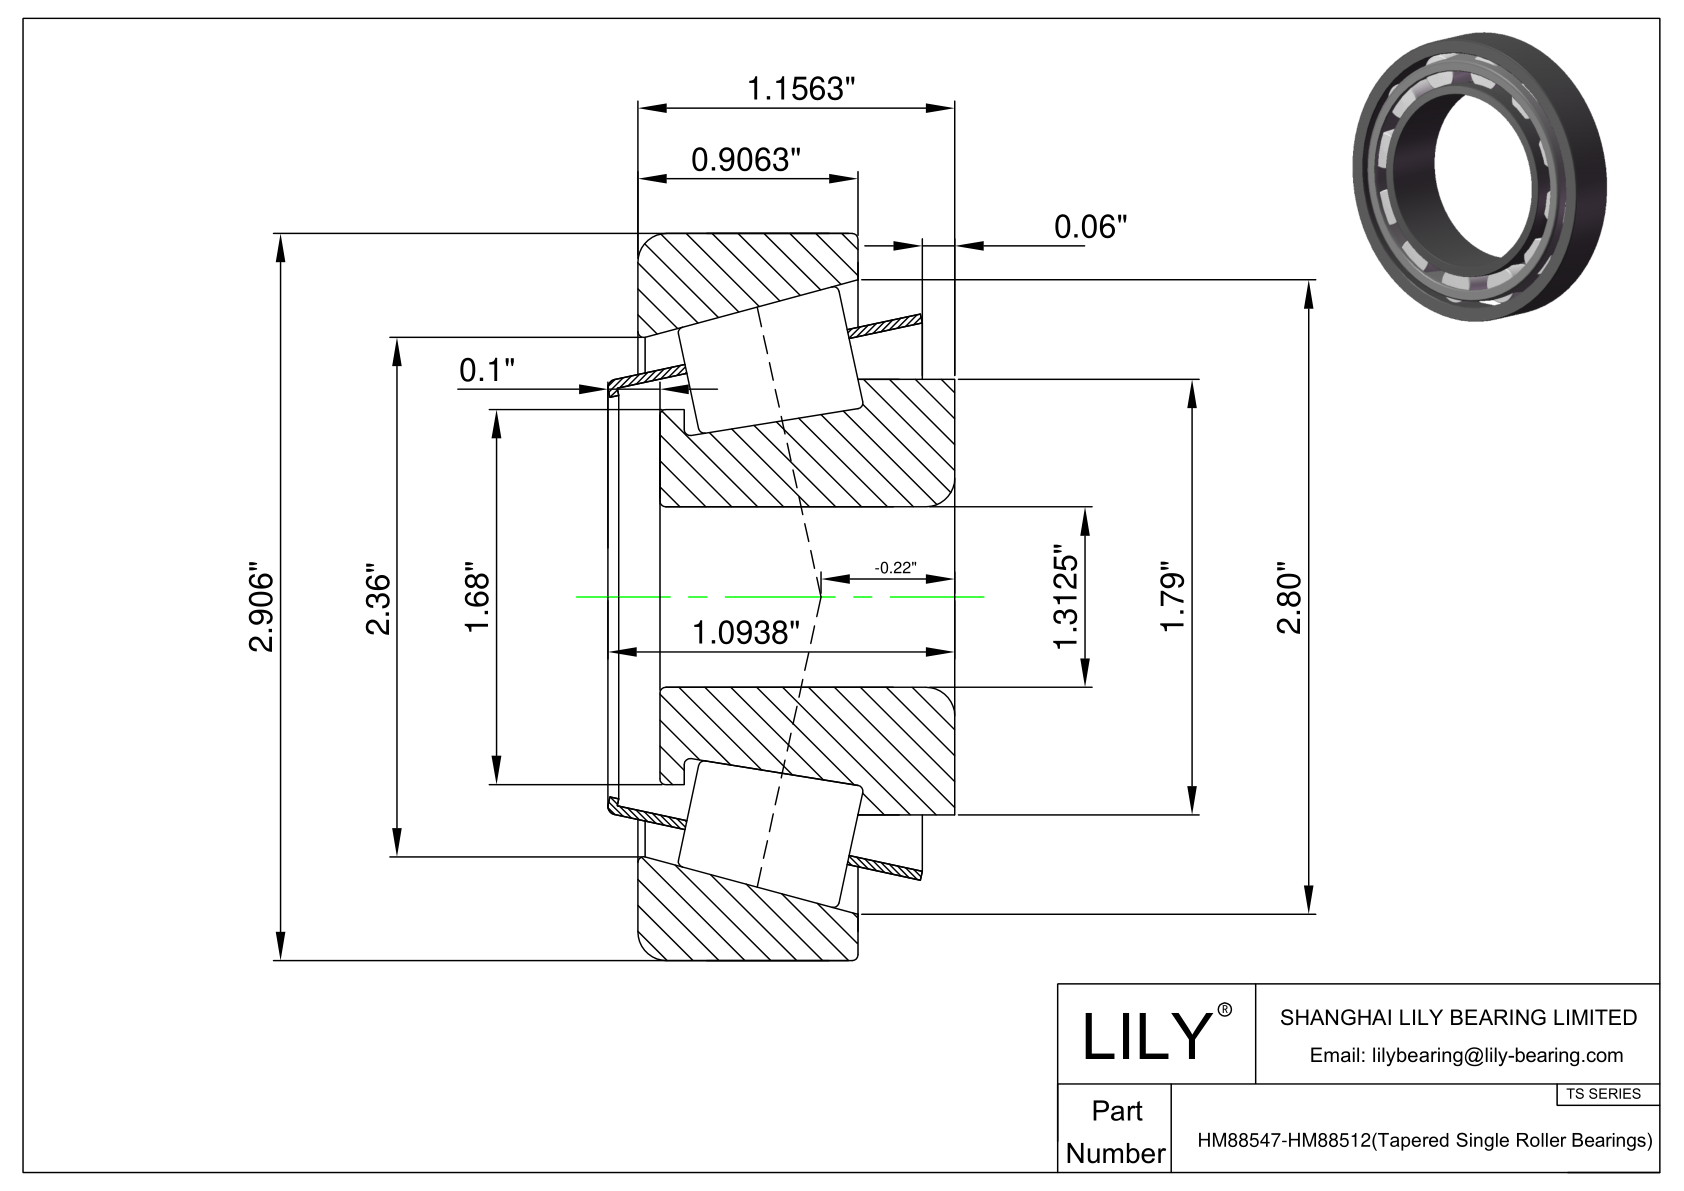 HM88547-HM88512 TS (Tapered Single Roller Bearings) (Imperial) cad drawing